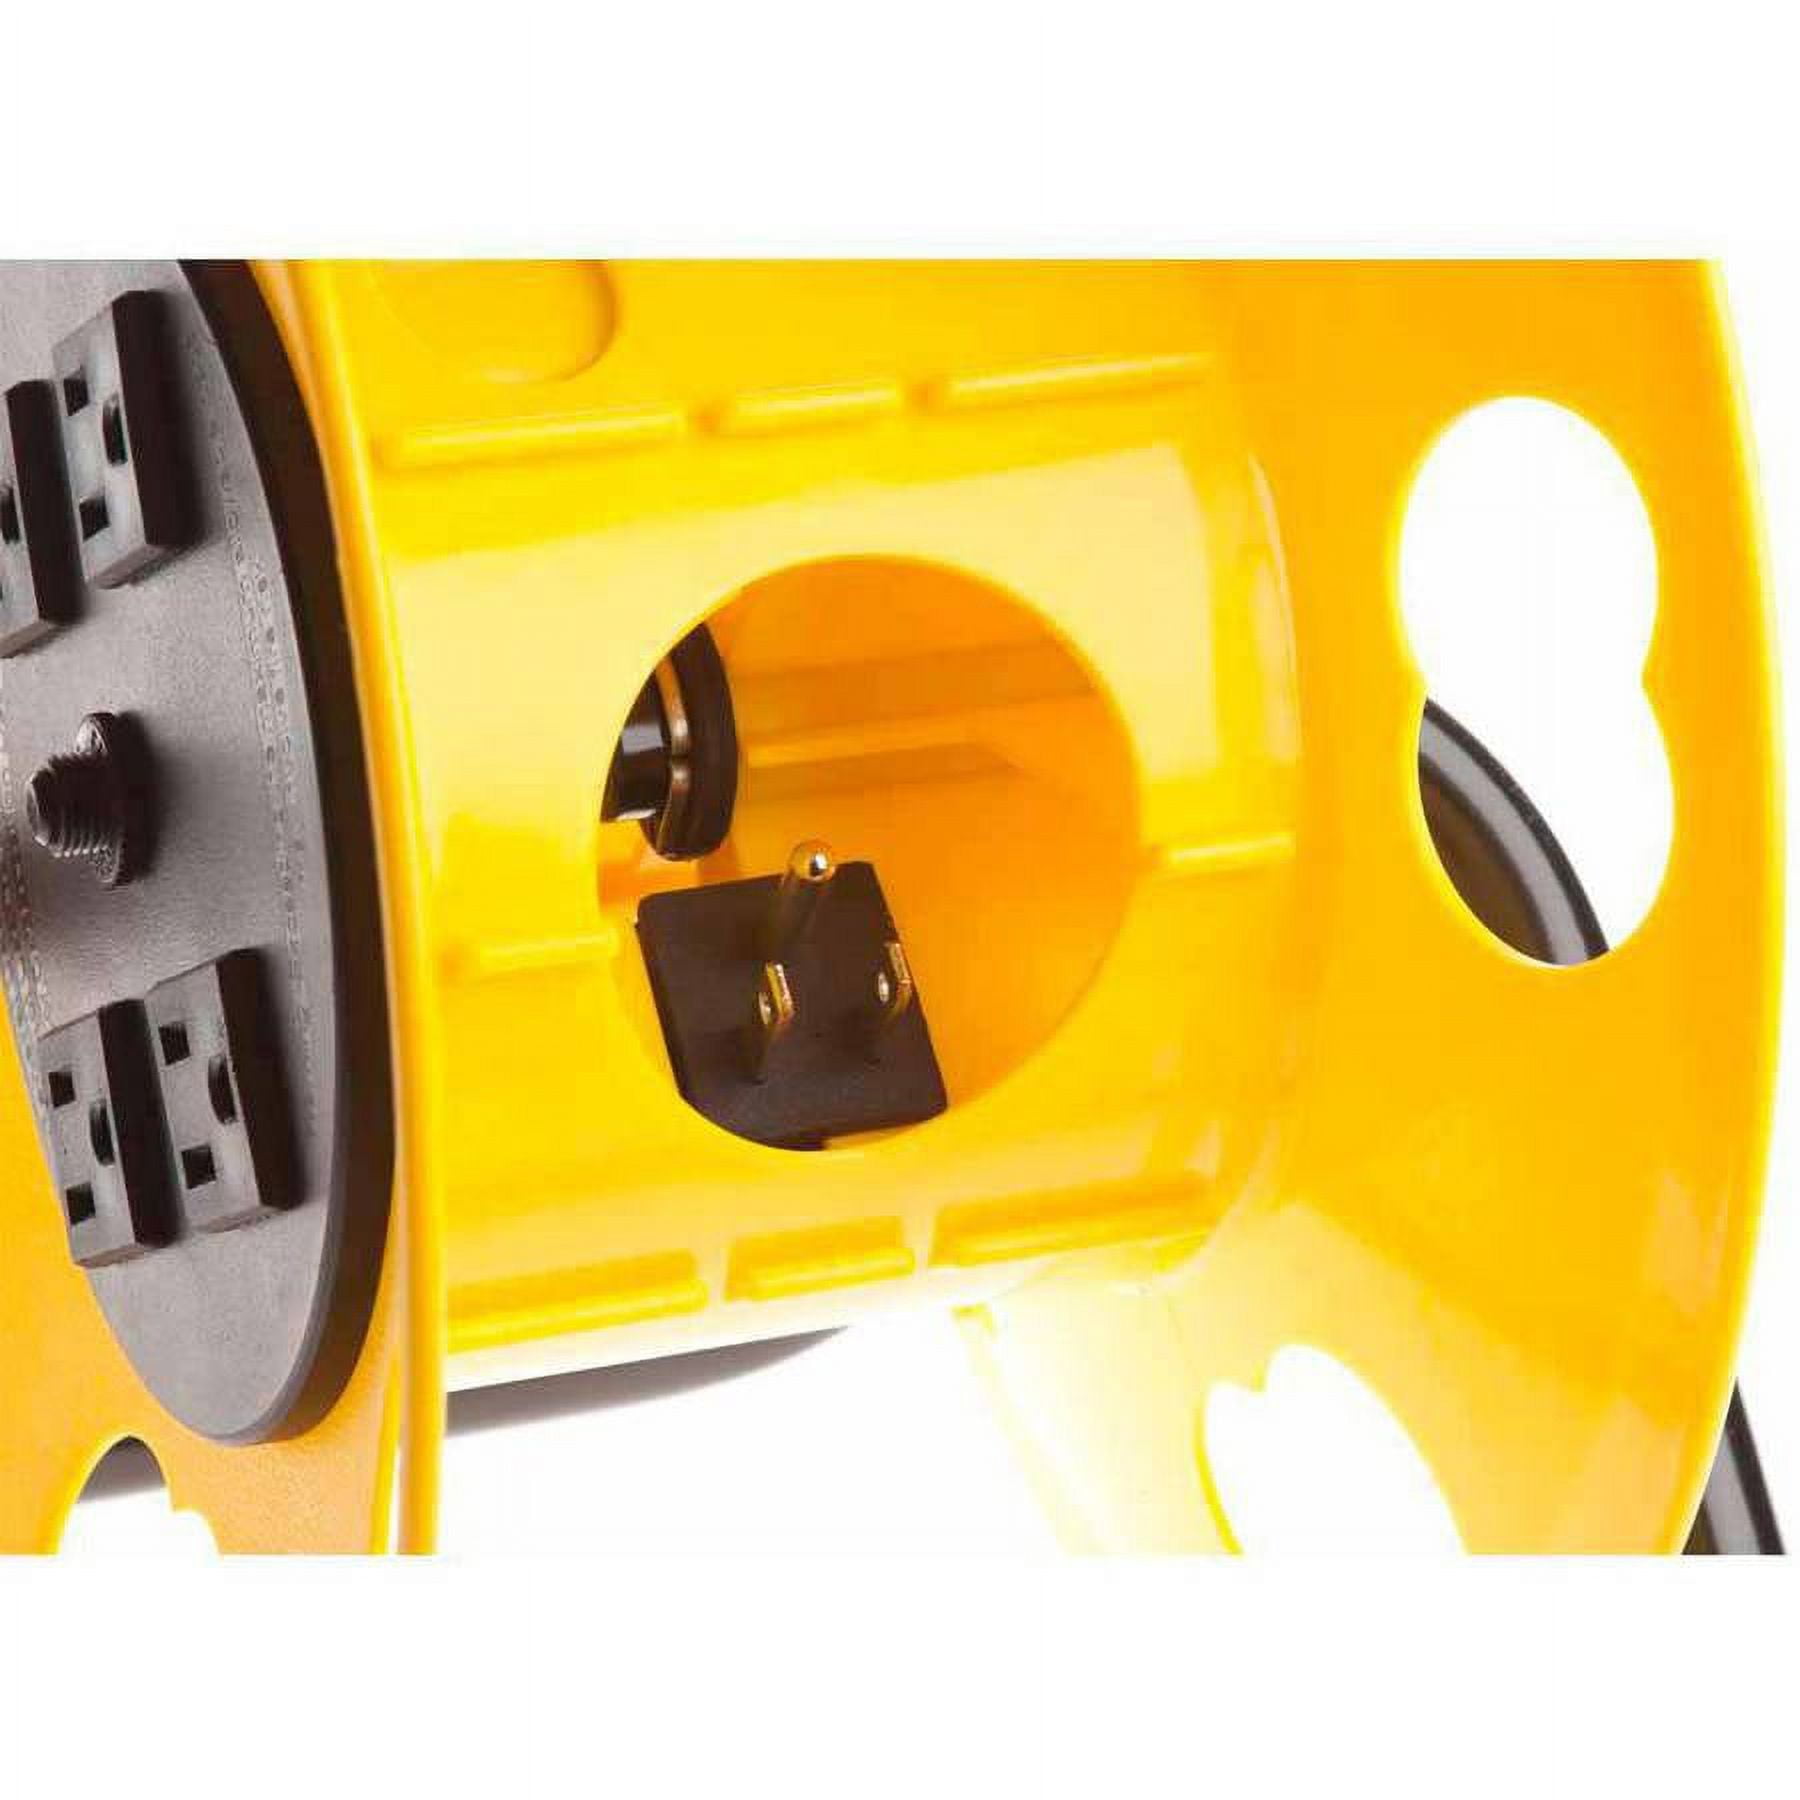 With - With Handle Yellow Black Add-A-Cord SL2000PDQ Bayco Circuit Breaker Tap Quad Reel Cord